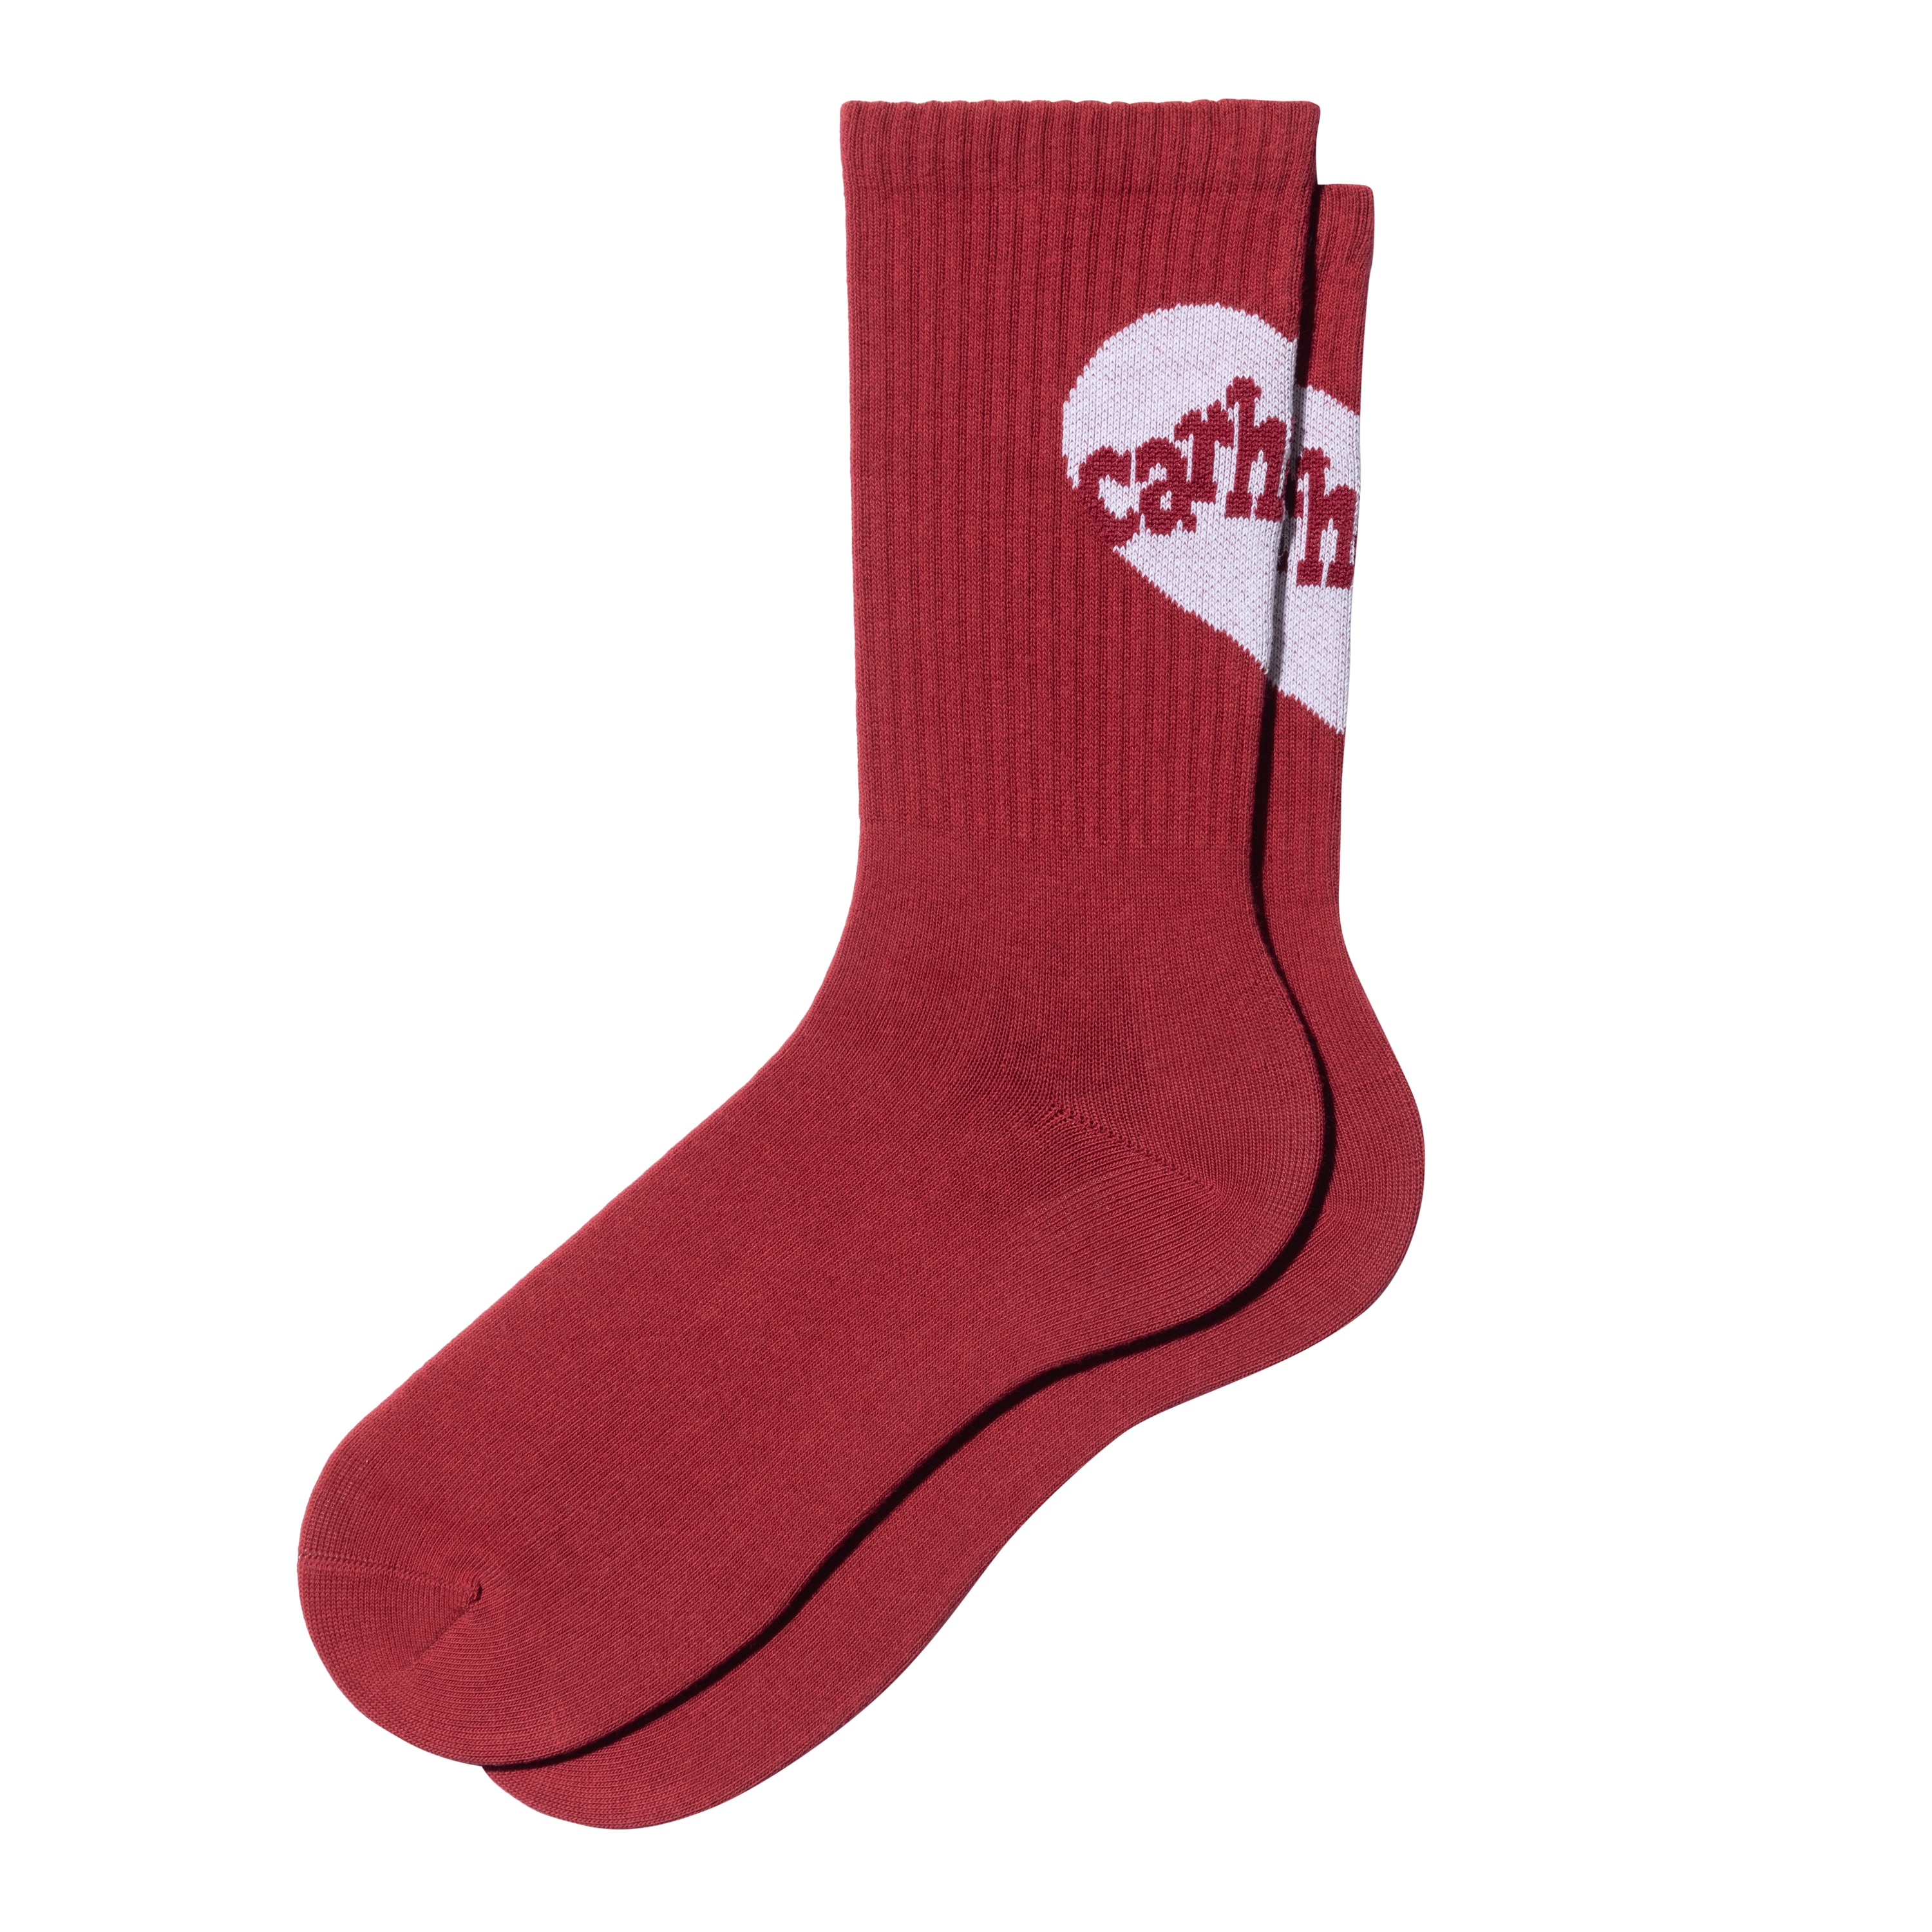 Carhartt WIP Amour Socks in Rosso